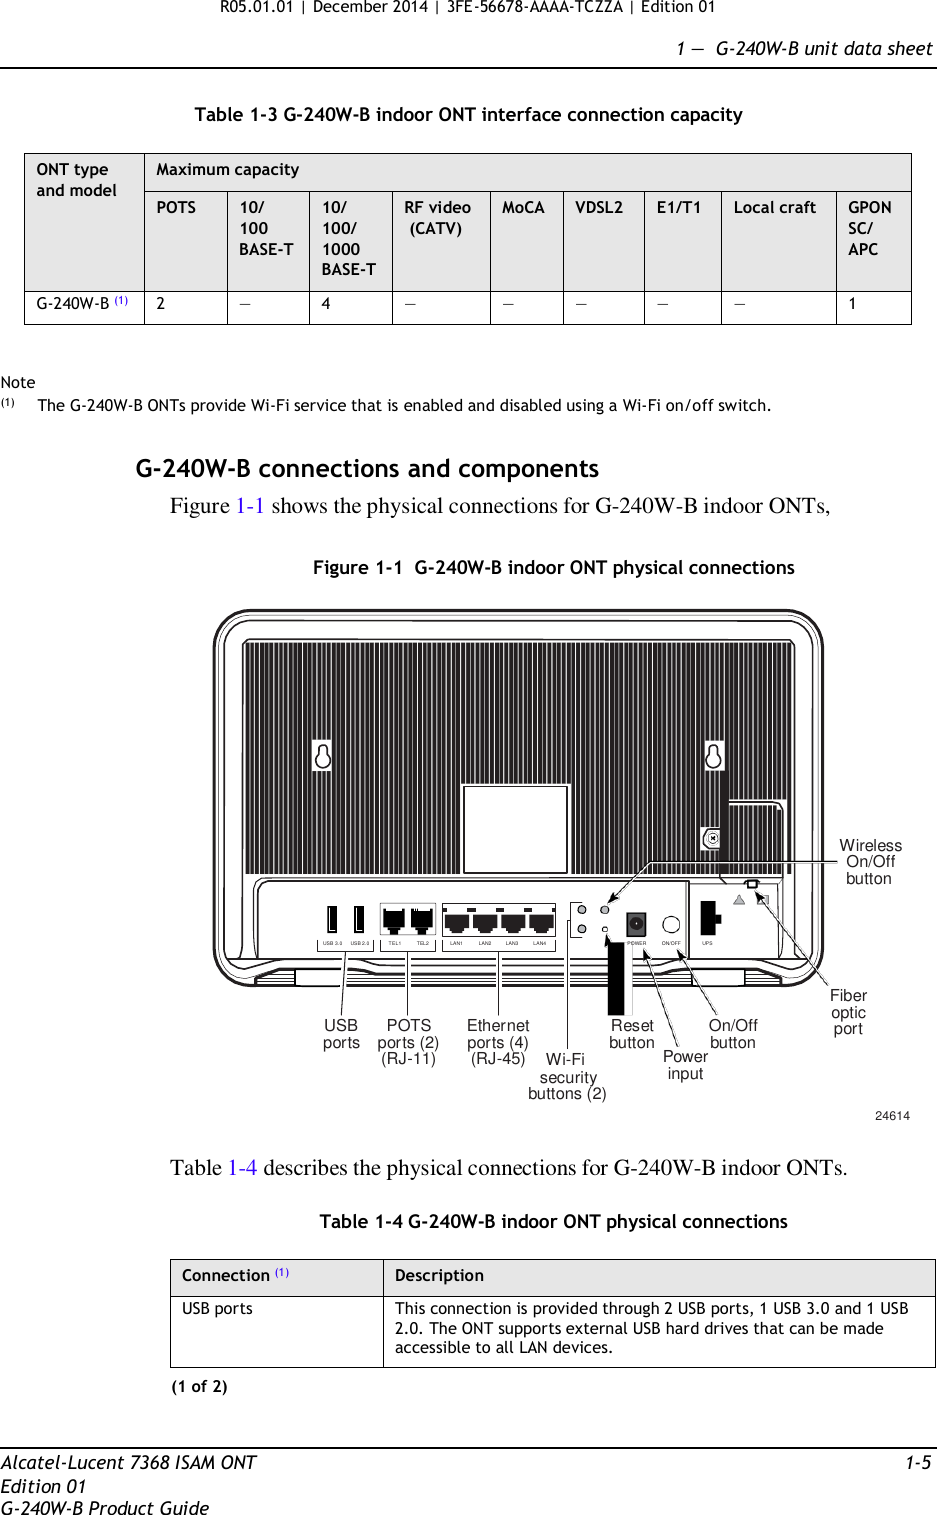 R05.01.01 | December 2014 | 3FE-56678-AAAA-TCZZA | Edition 01  1 —  G-240W-B unit data sheet   Table 1-3 G-240W-B indoor ONT interface connection capacity  ONT type and model Maximum capacity POTS 10/ 100 BASE-T 10/ 100/ 1000 BASE-T RF video (CATV) MoCA VDSL2 E1/T1 Local craft GPON SC/ APC G-240W-B (1) 2 — 4 — — — — — 1   Note (1)   The G-240W-B ONTs provide Wi-Fi service that is enabled and disabled using a Wi-Fi on/off switch.   G-240W-B connections and components Figure 1-1 shows the physical connections for G-240W-B indoor ONTs,   Figure 1-1  G-240W-B indoor ONT physical connections             Wireless On/Off button   USB 3.0     USB 2.0             TEL1           TEL2  LAN1           LAN2          LAN3          LAN4  POWER           ON/OFF  UPS     USB ports   POTS ports (2) (RJ-11)   Ethernet ports (4) (RJ-45) Wi-Fi security buttons (2)   Reset button    Power input   On/Off button Fiber optic port       24614  Table 1-4 describes the physical connections for G-240W-B indoor ONTs.  Table 1-4 G-240W-B indoor ONT physical connections  Connection (1) Description USB ports This connection is provided through 2 USB ports, 1 USB 3.0 and 1 USB 2.0. The ONT supports external USB hard drives that can be made accessible to all LAN devices. (1 of 2)    Alcatel-Lucent 7368 ISAM ONT  1-5 Edition 01 G-240W-B Product Guide 